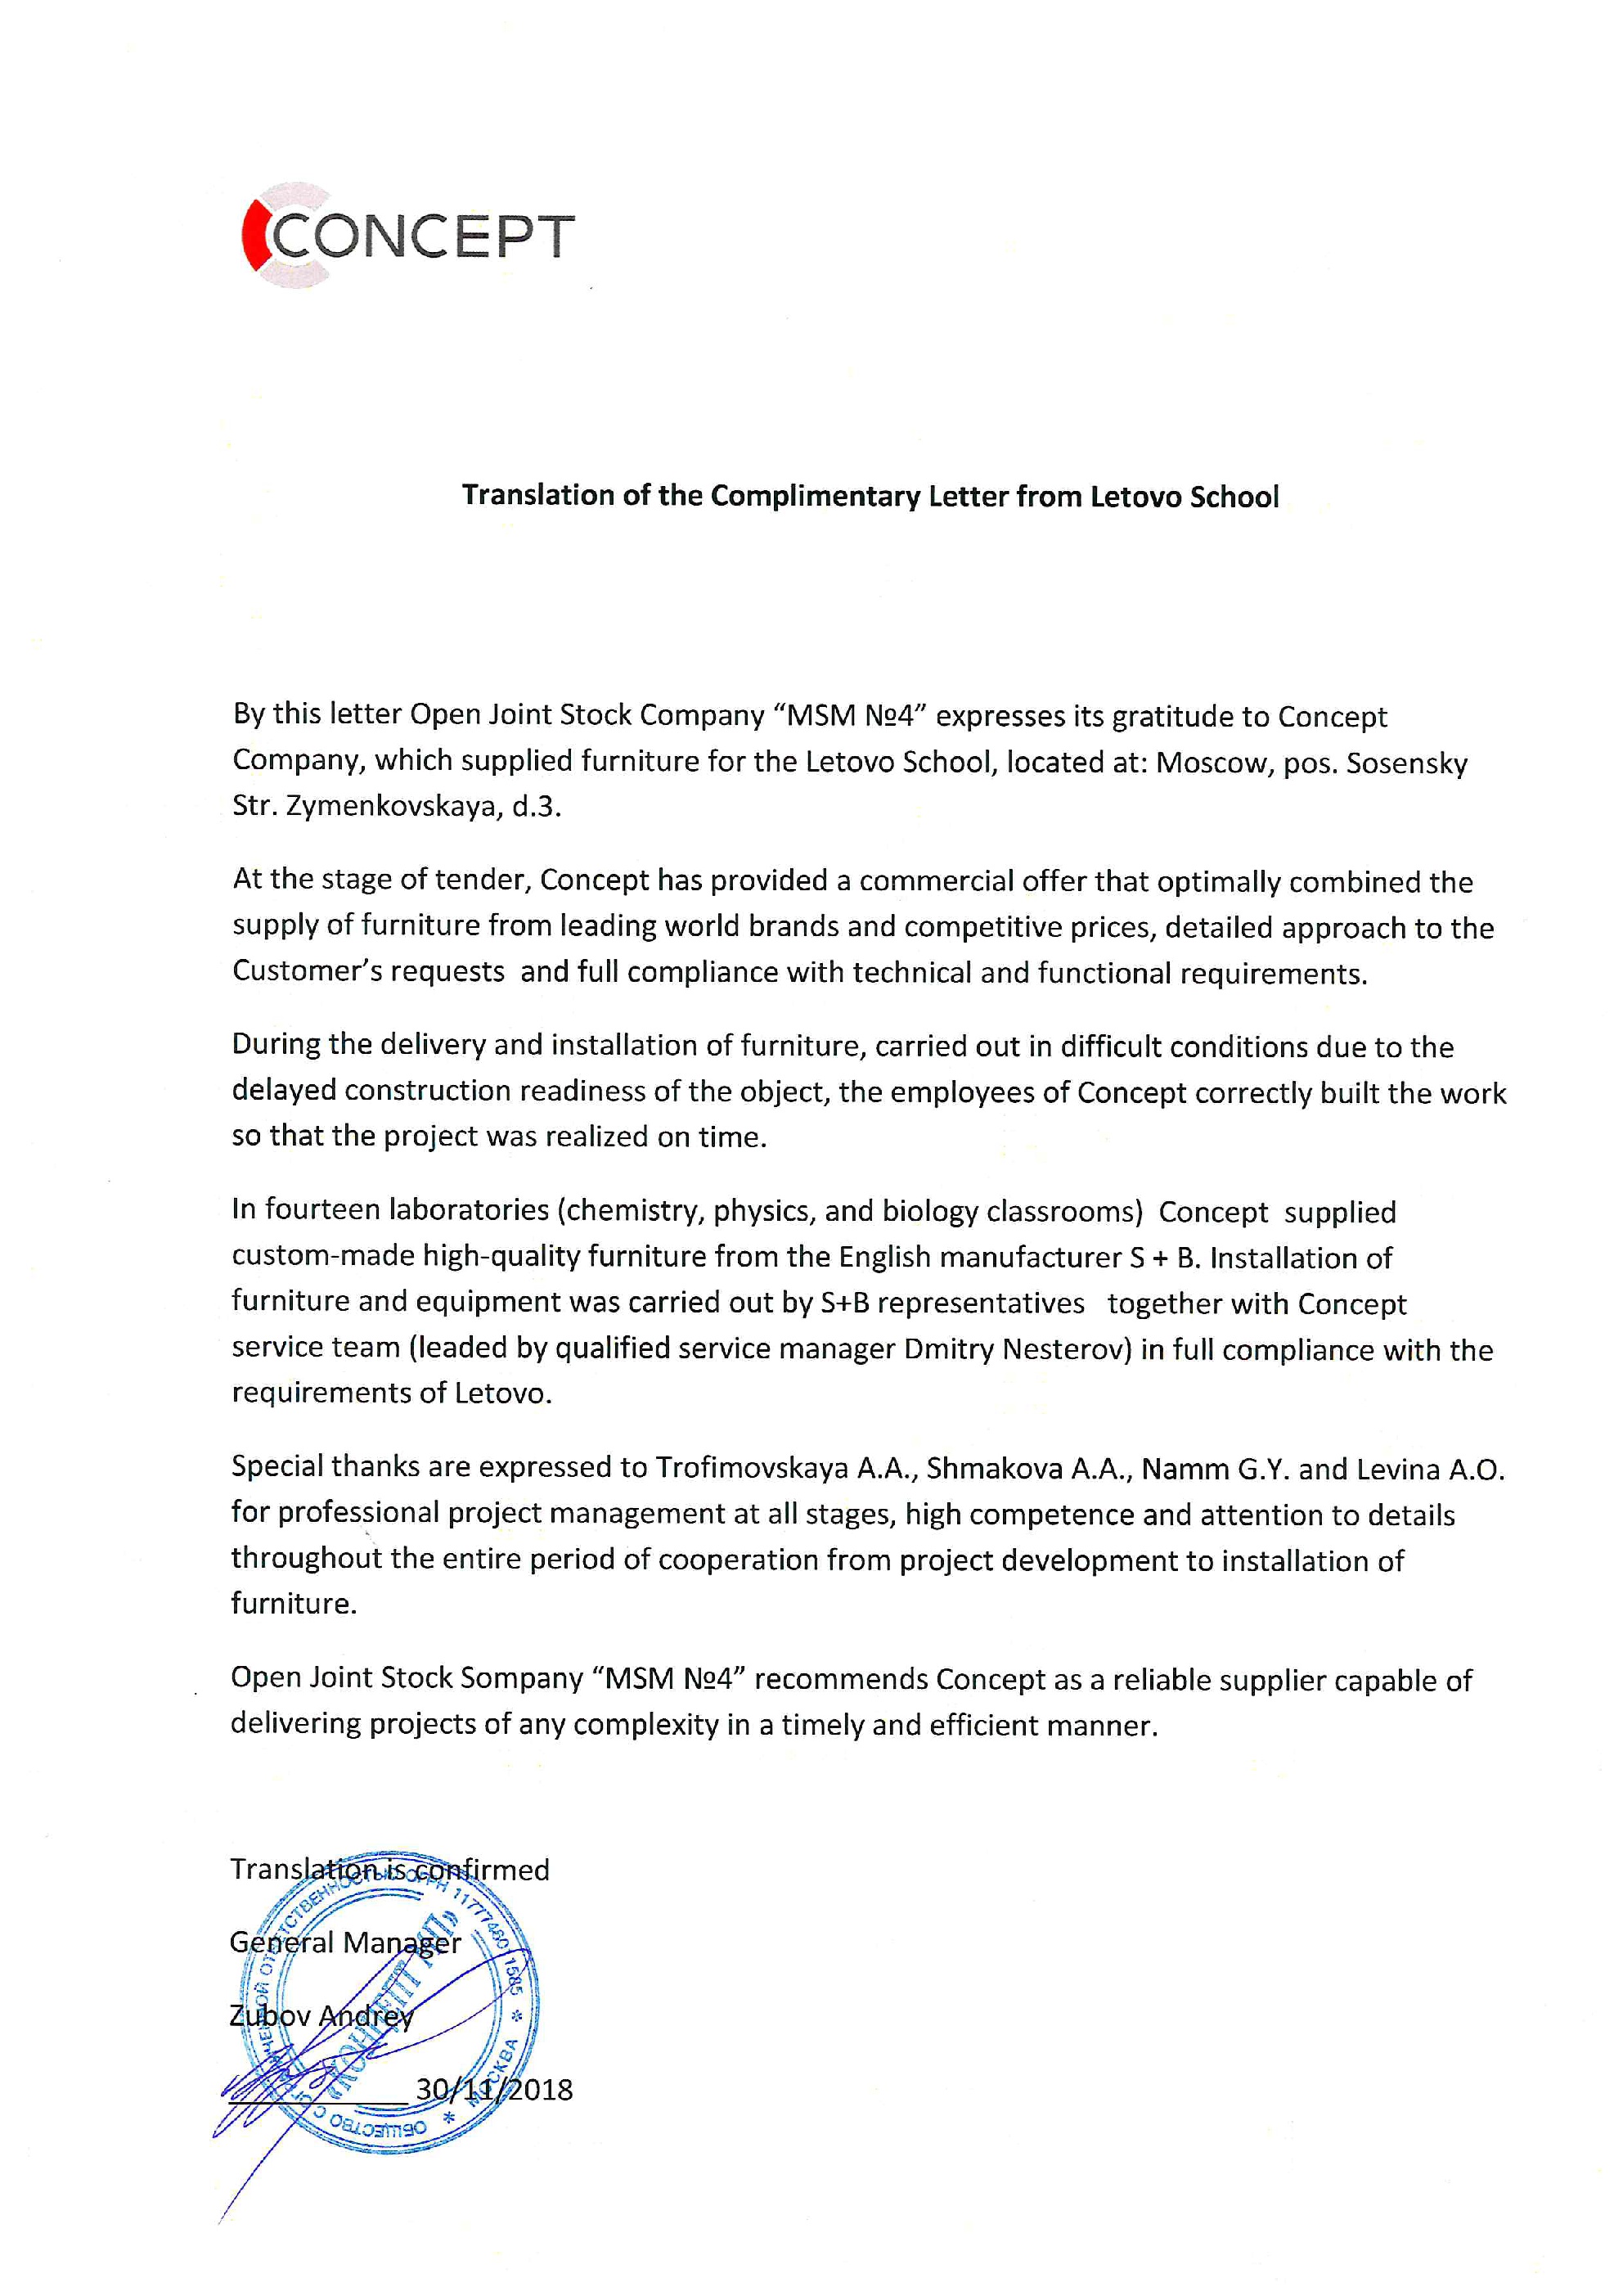 Reference Letter from Letovo School to Concept